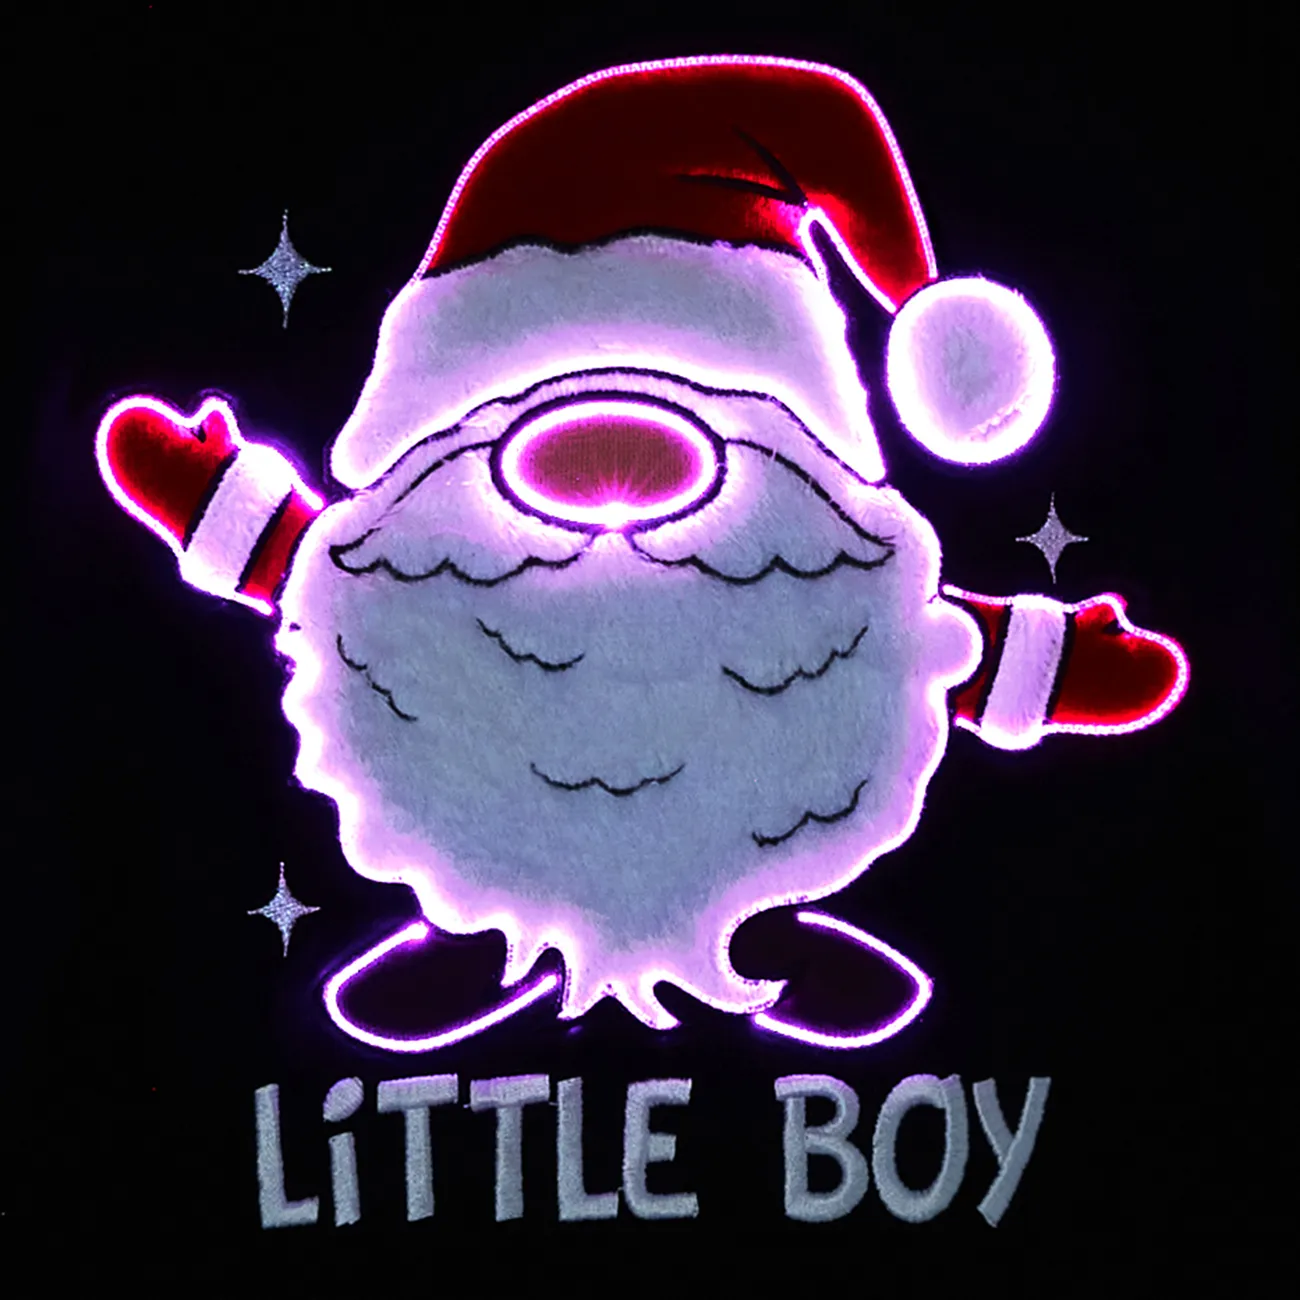 Go-Glow Christmas Family Matching Long-sleeve Tops with Santa Embroidery Glowing & Illuminating Dress with Light Up Skirt Including Controller (Built-In Battery) Black big image 1